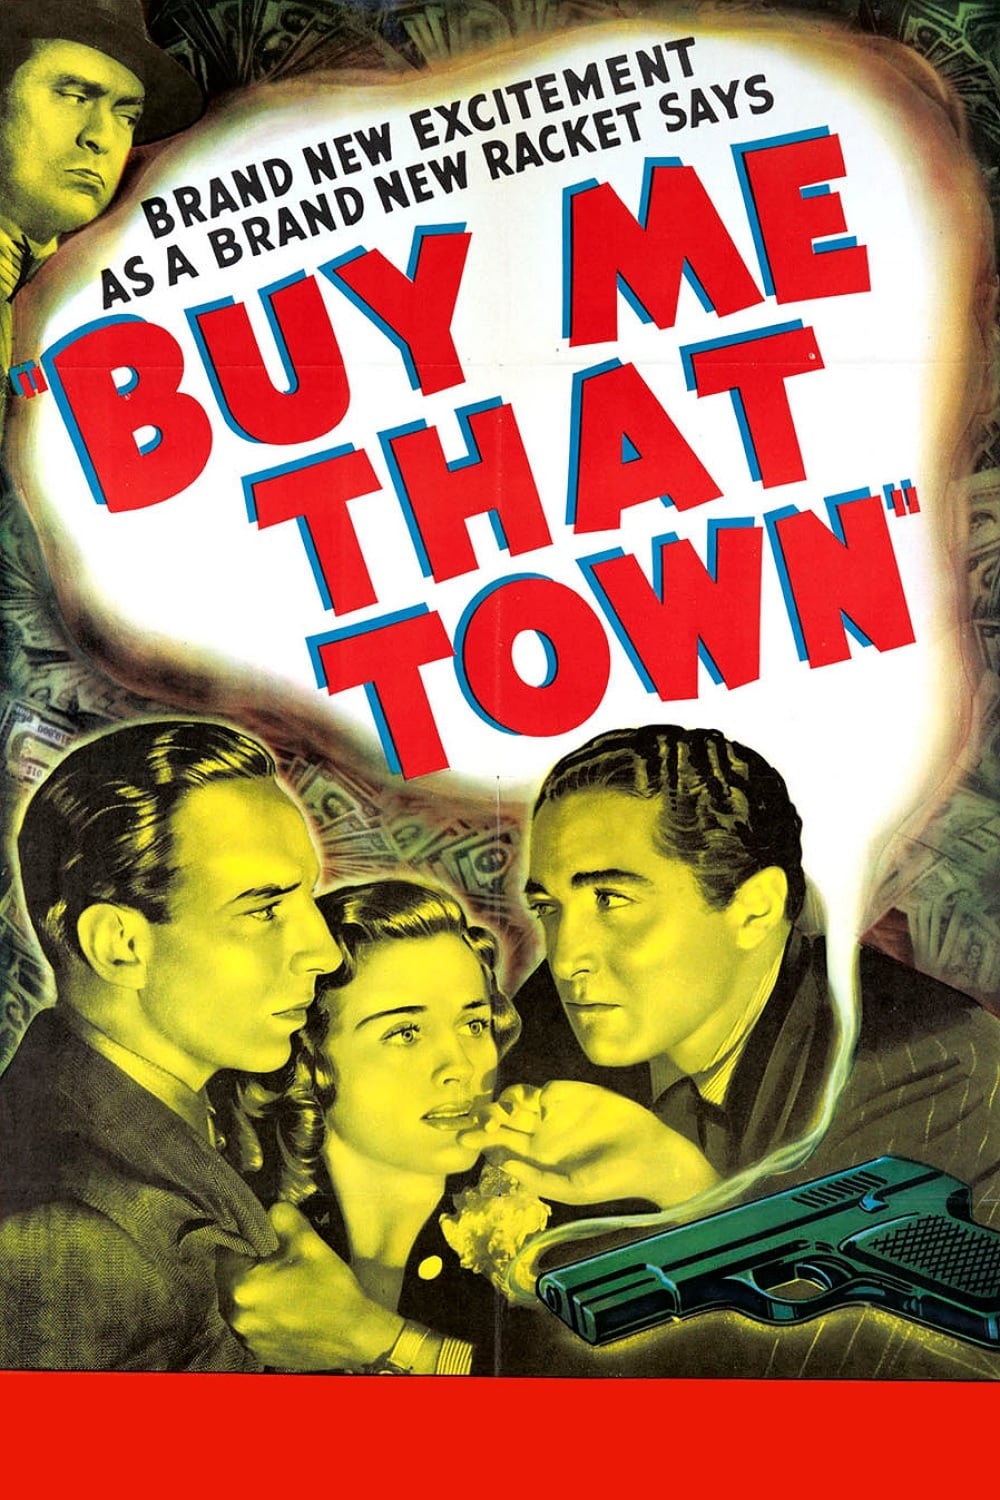 Buy Me That Town streaming